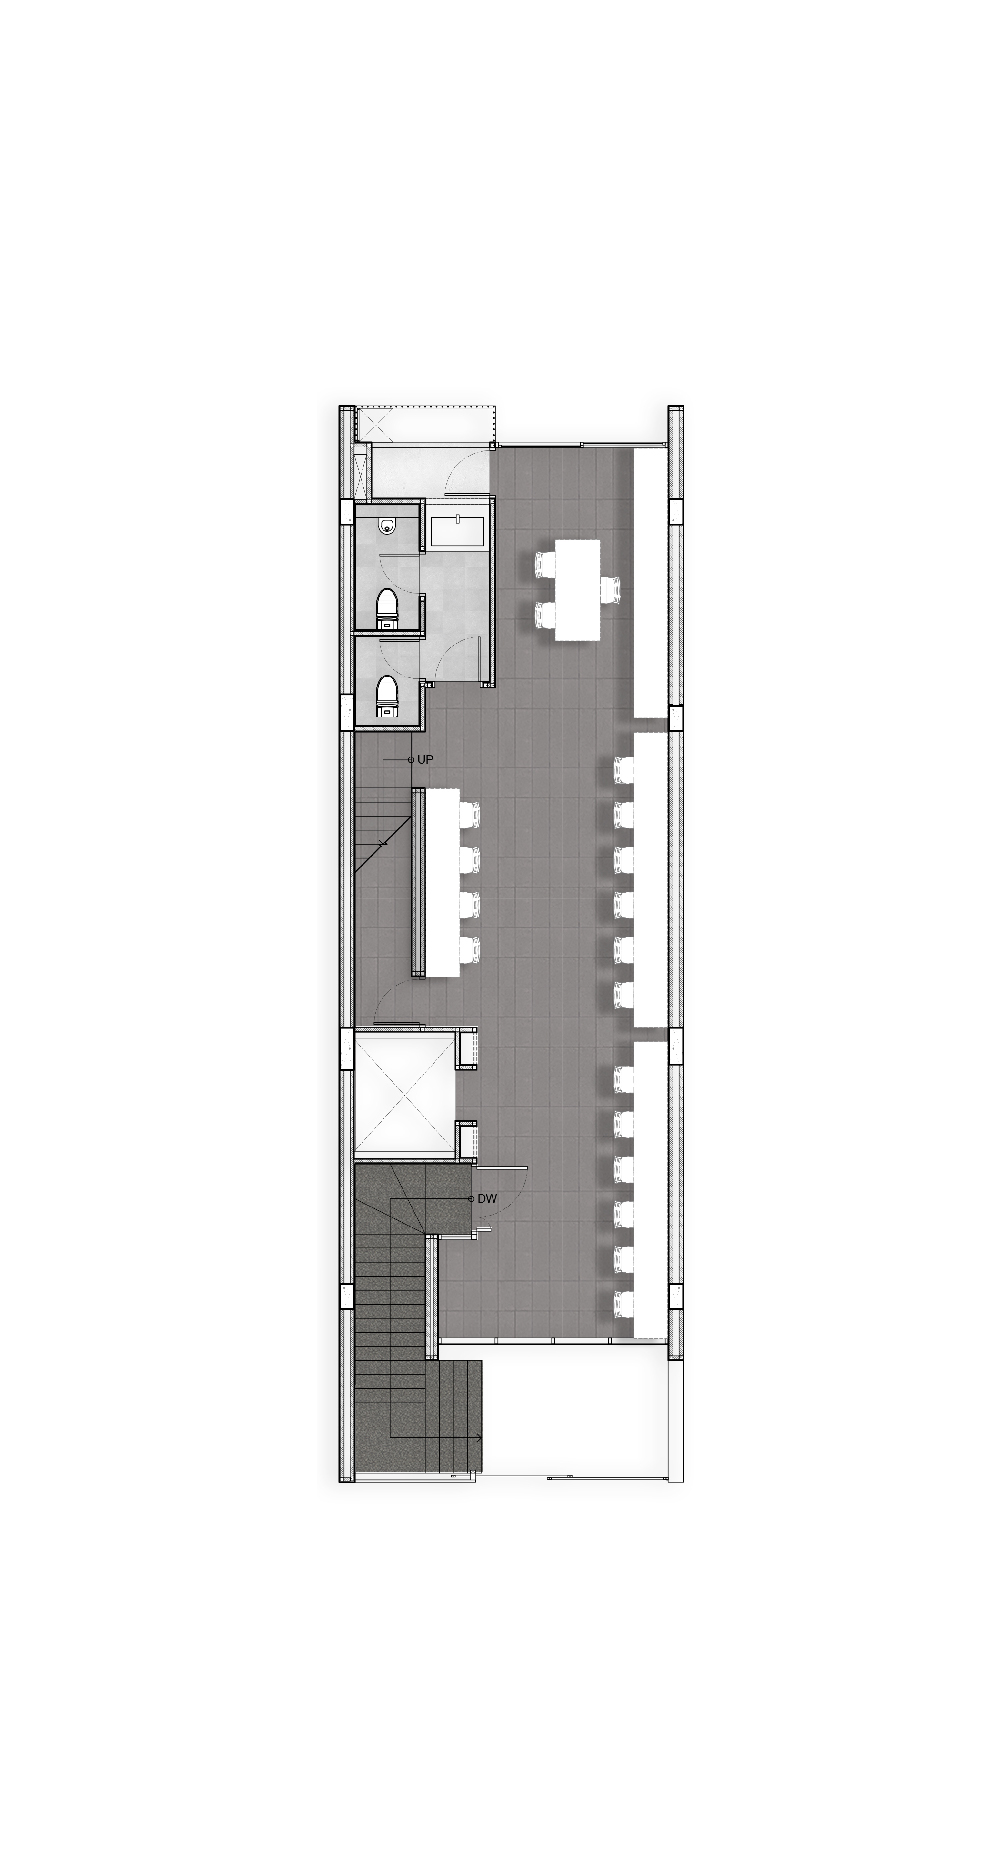 2nd Floor 92 SQ.M  Total Area 430 SQ.M